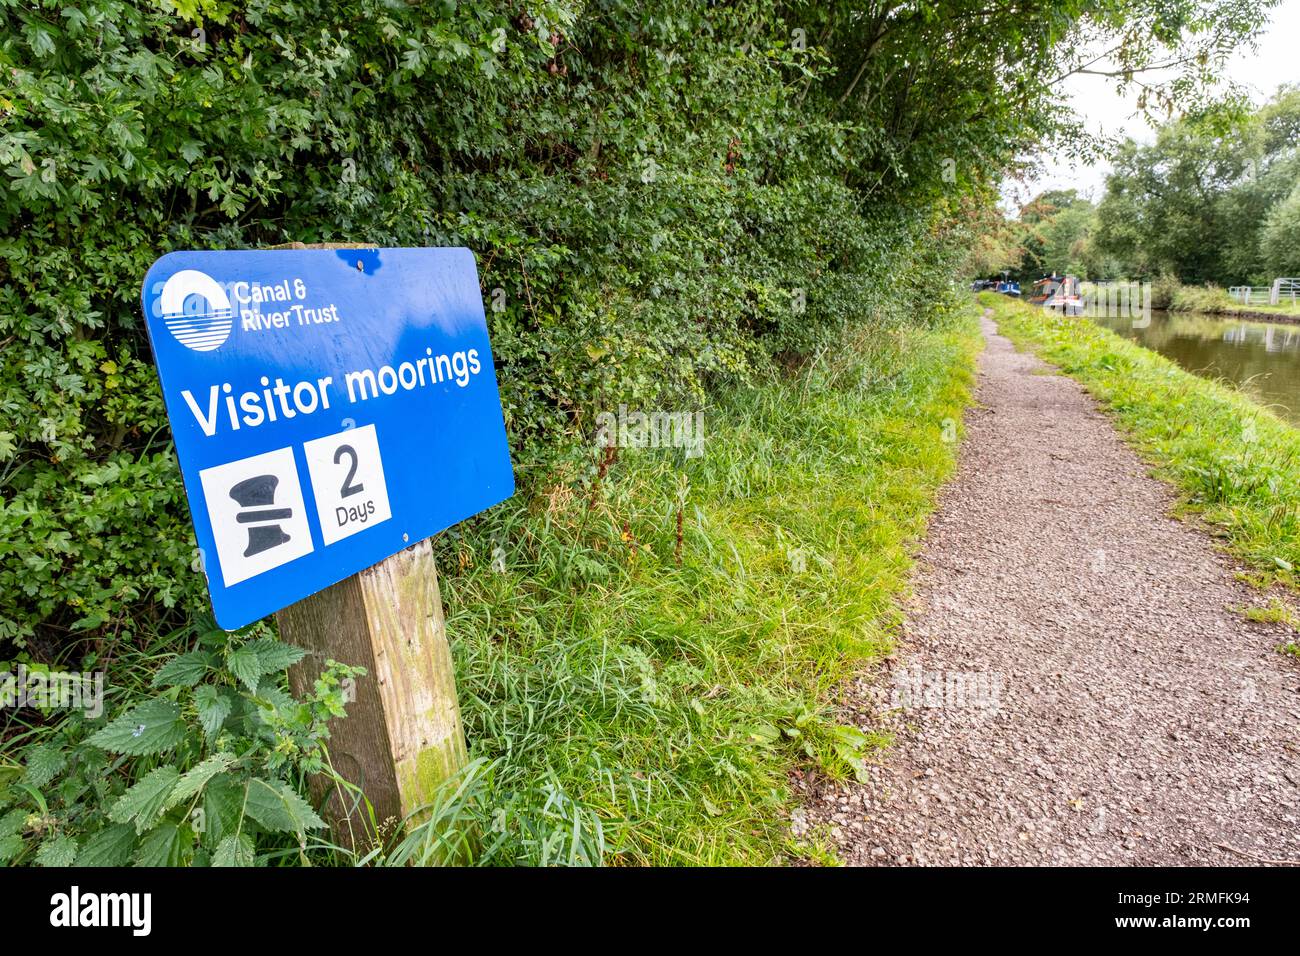 Canal & River trust sign, 2 days visitor moorings in Wheelock near Sandbach Cheshire UK Stock Photo